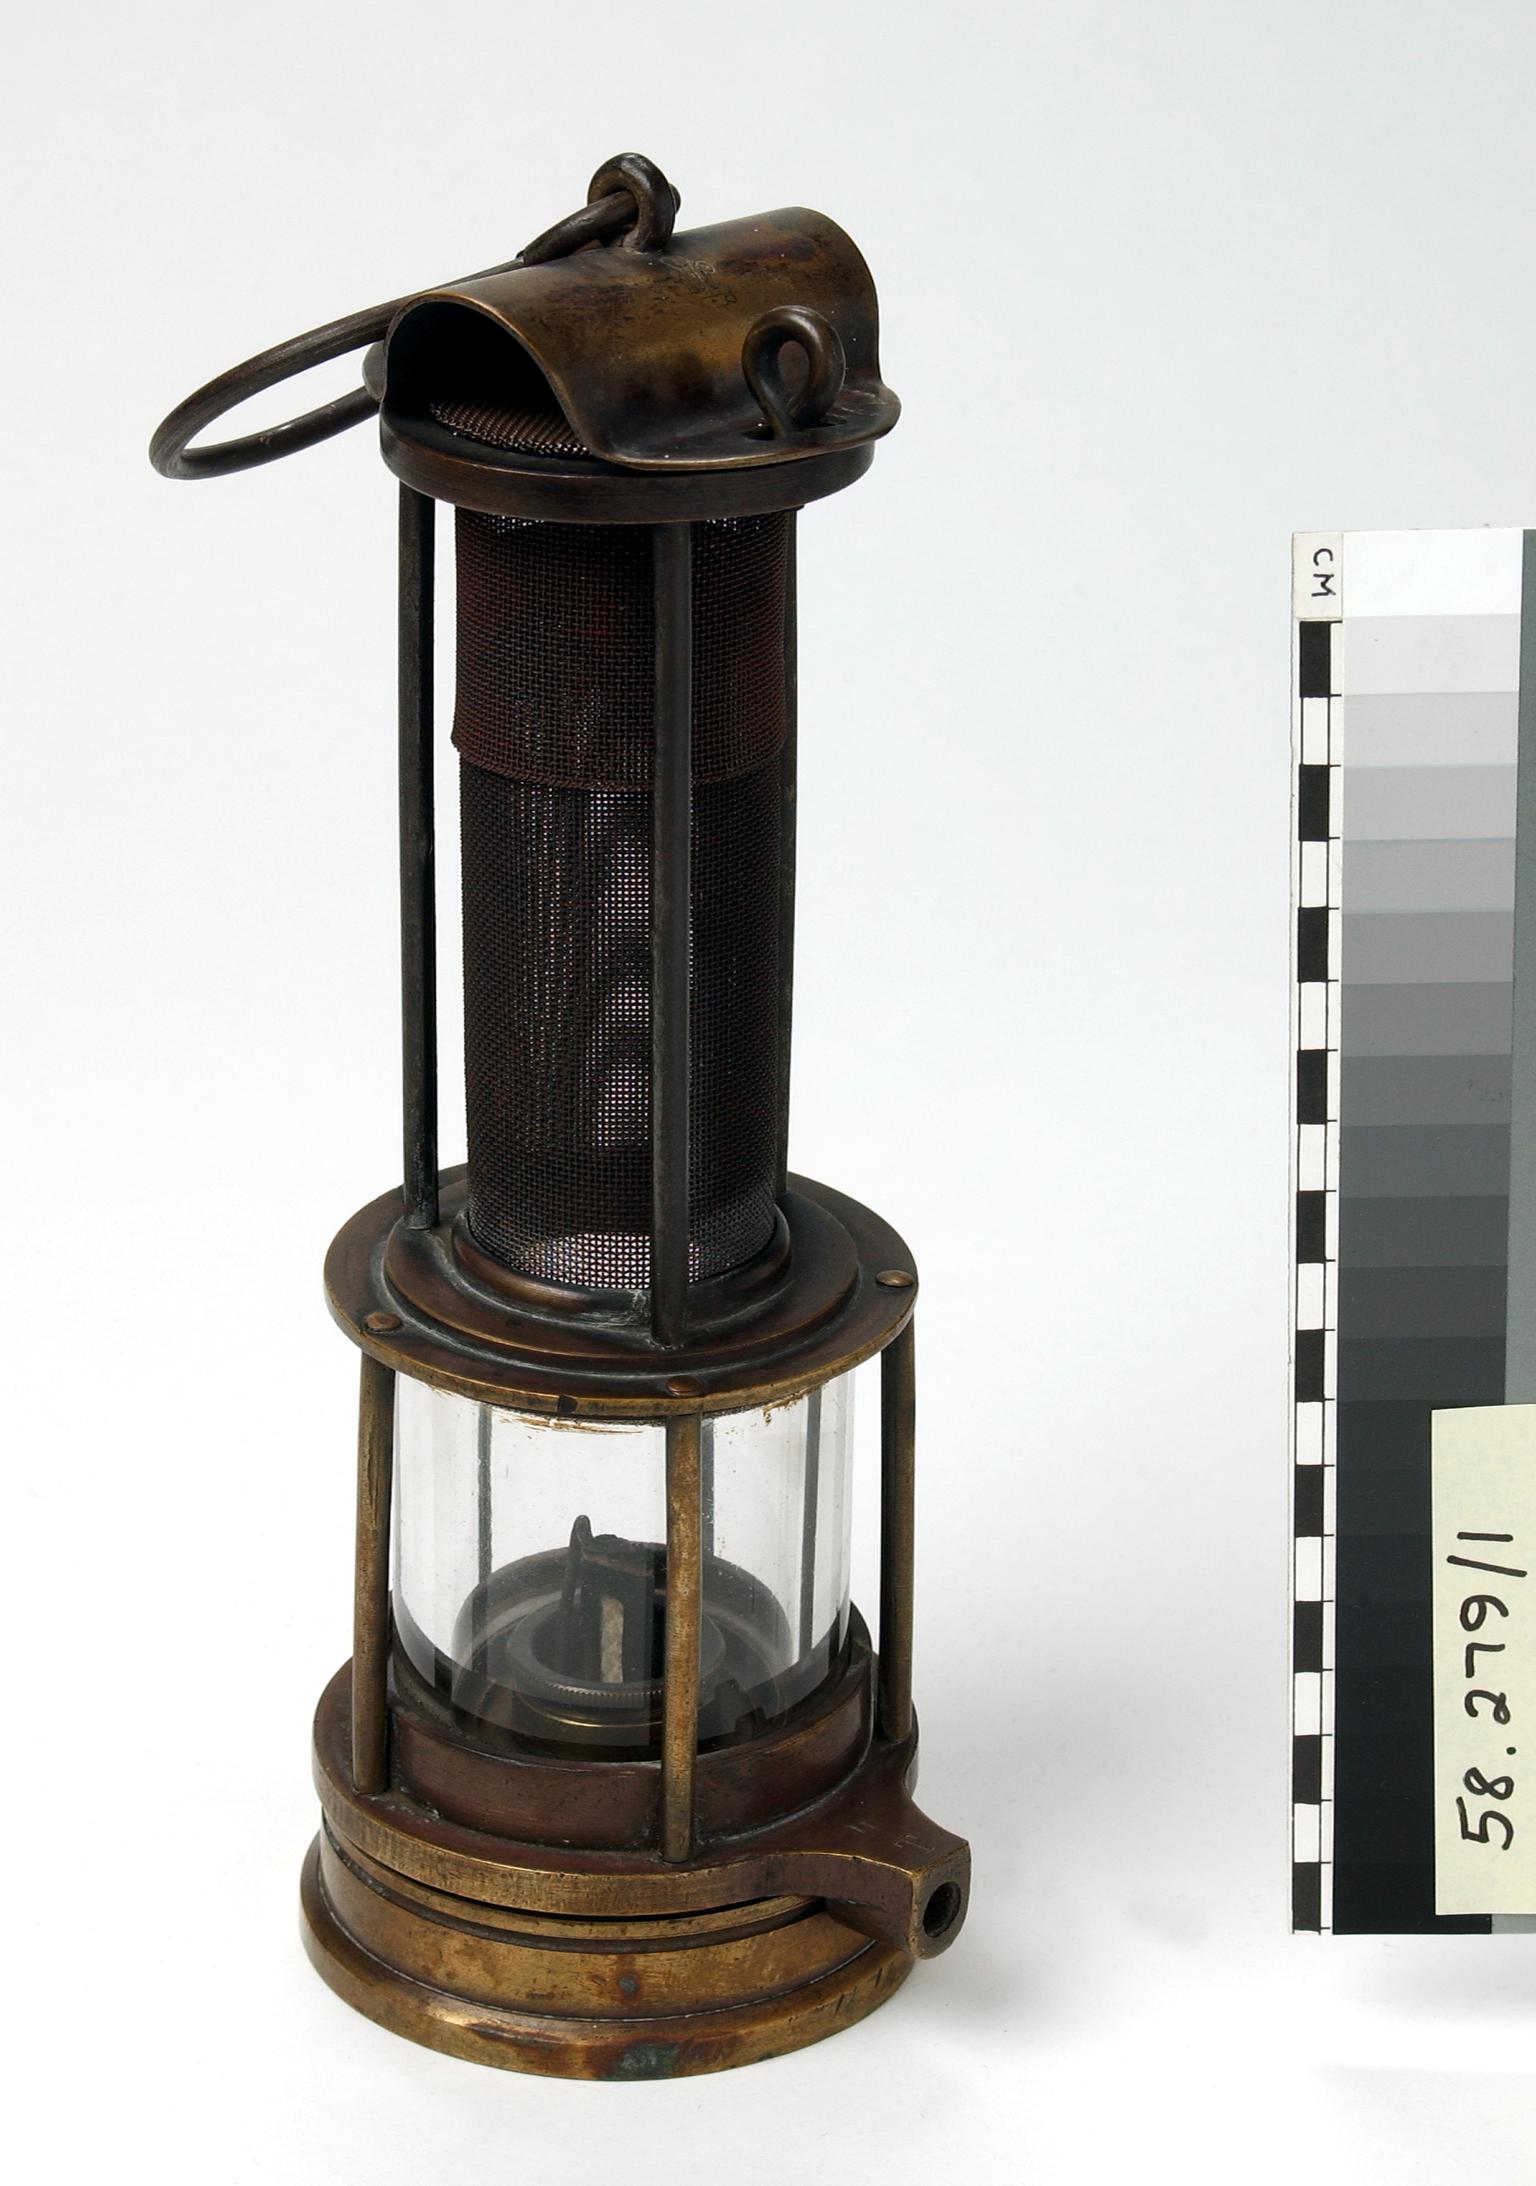 Clanny flame safety lamp